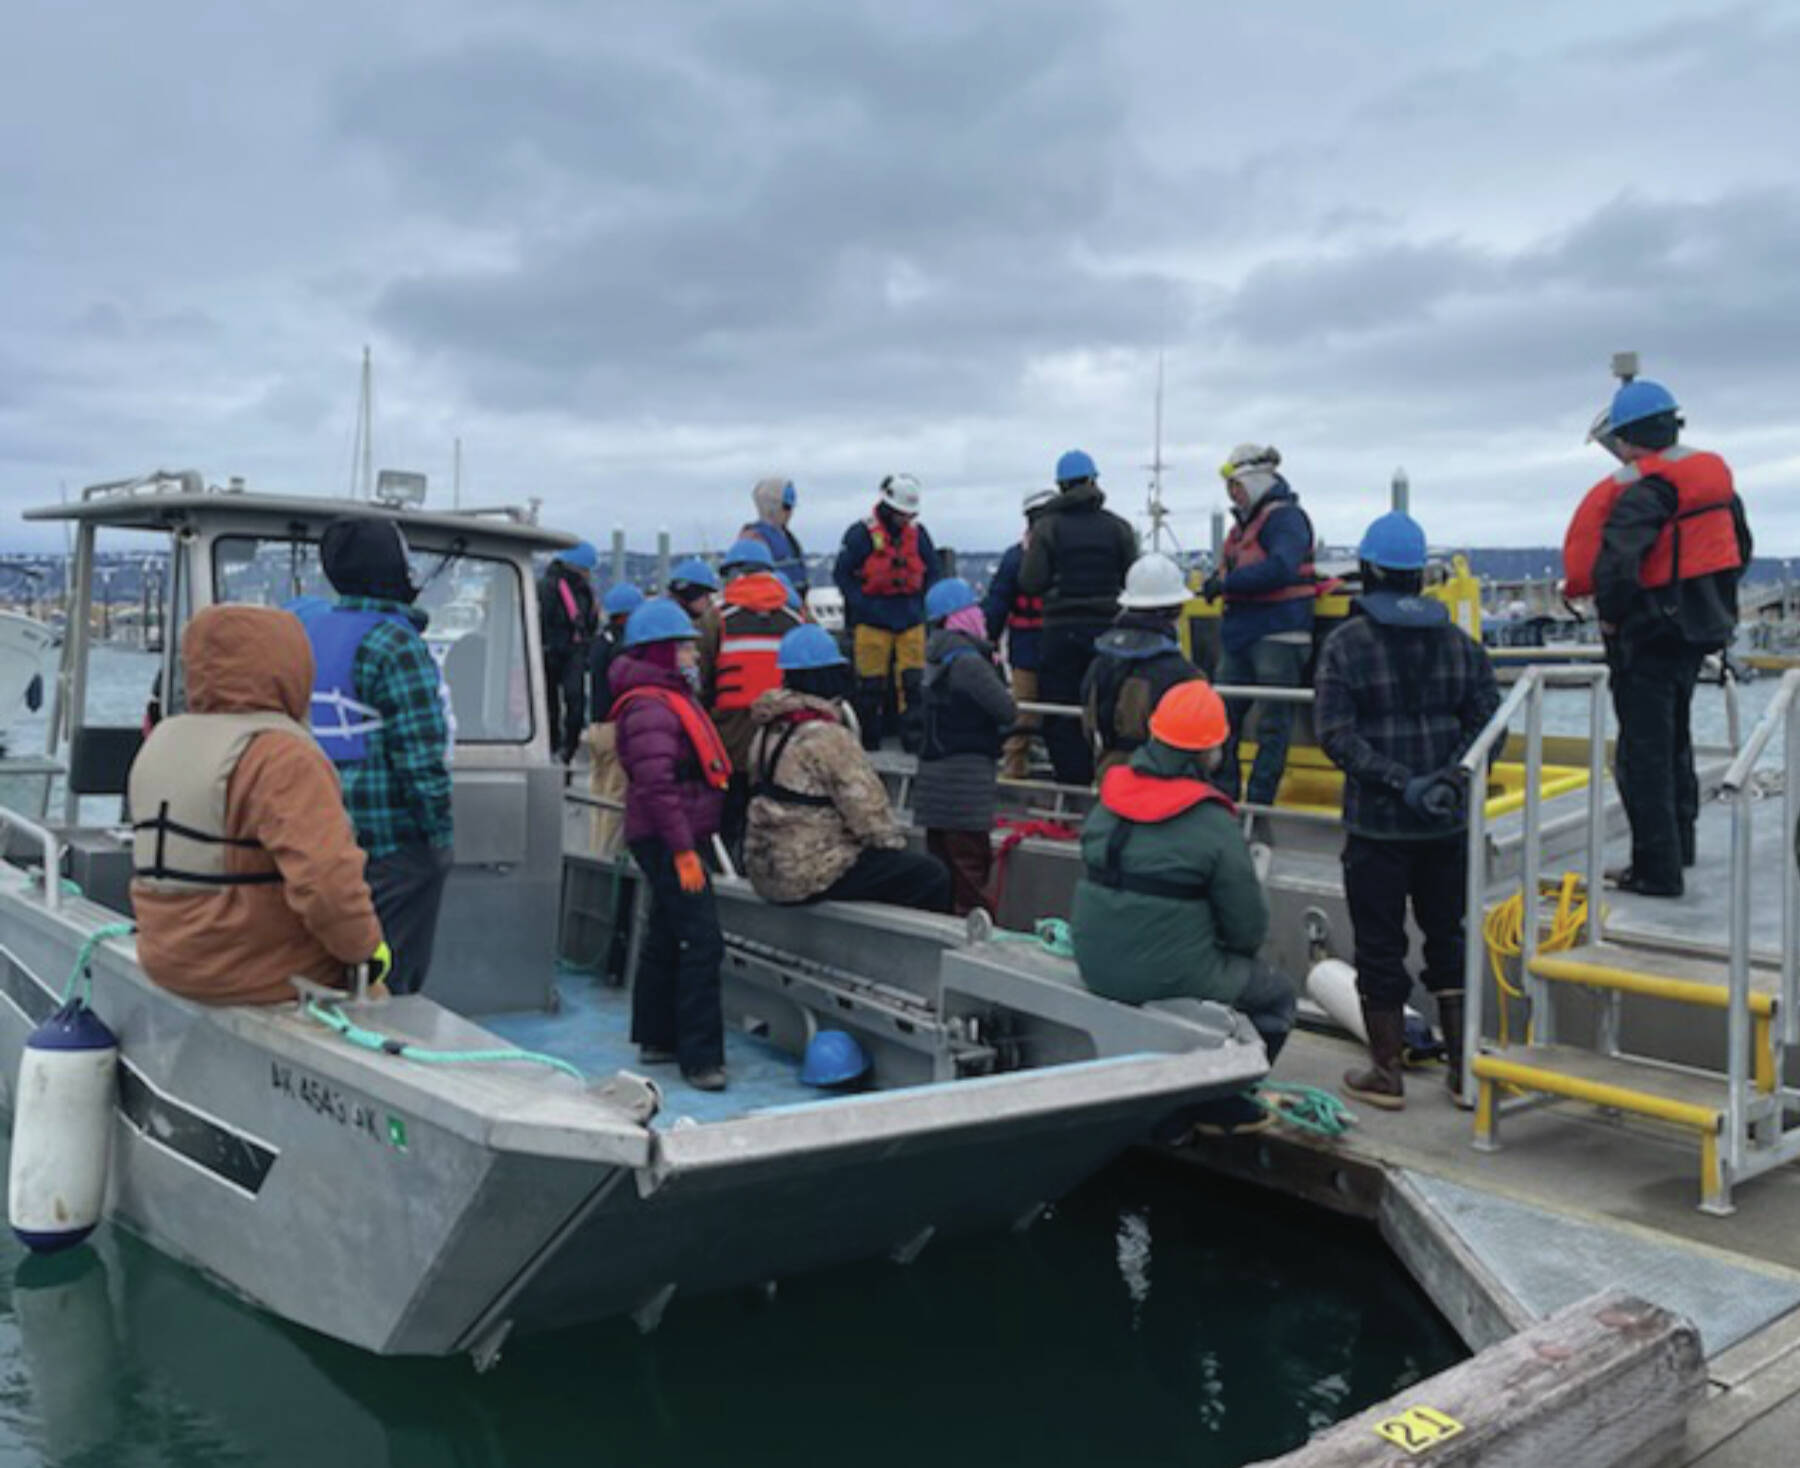 Photo by Emilie Springer/Homer News
SERVS trainees in the Homer Harbor on a training day April 11.